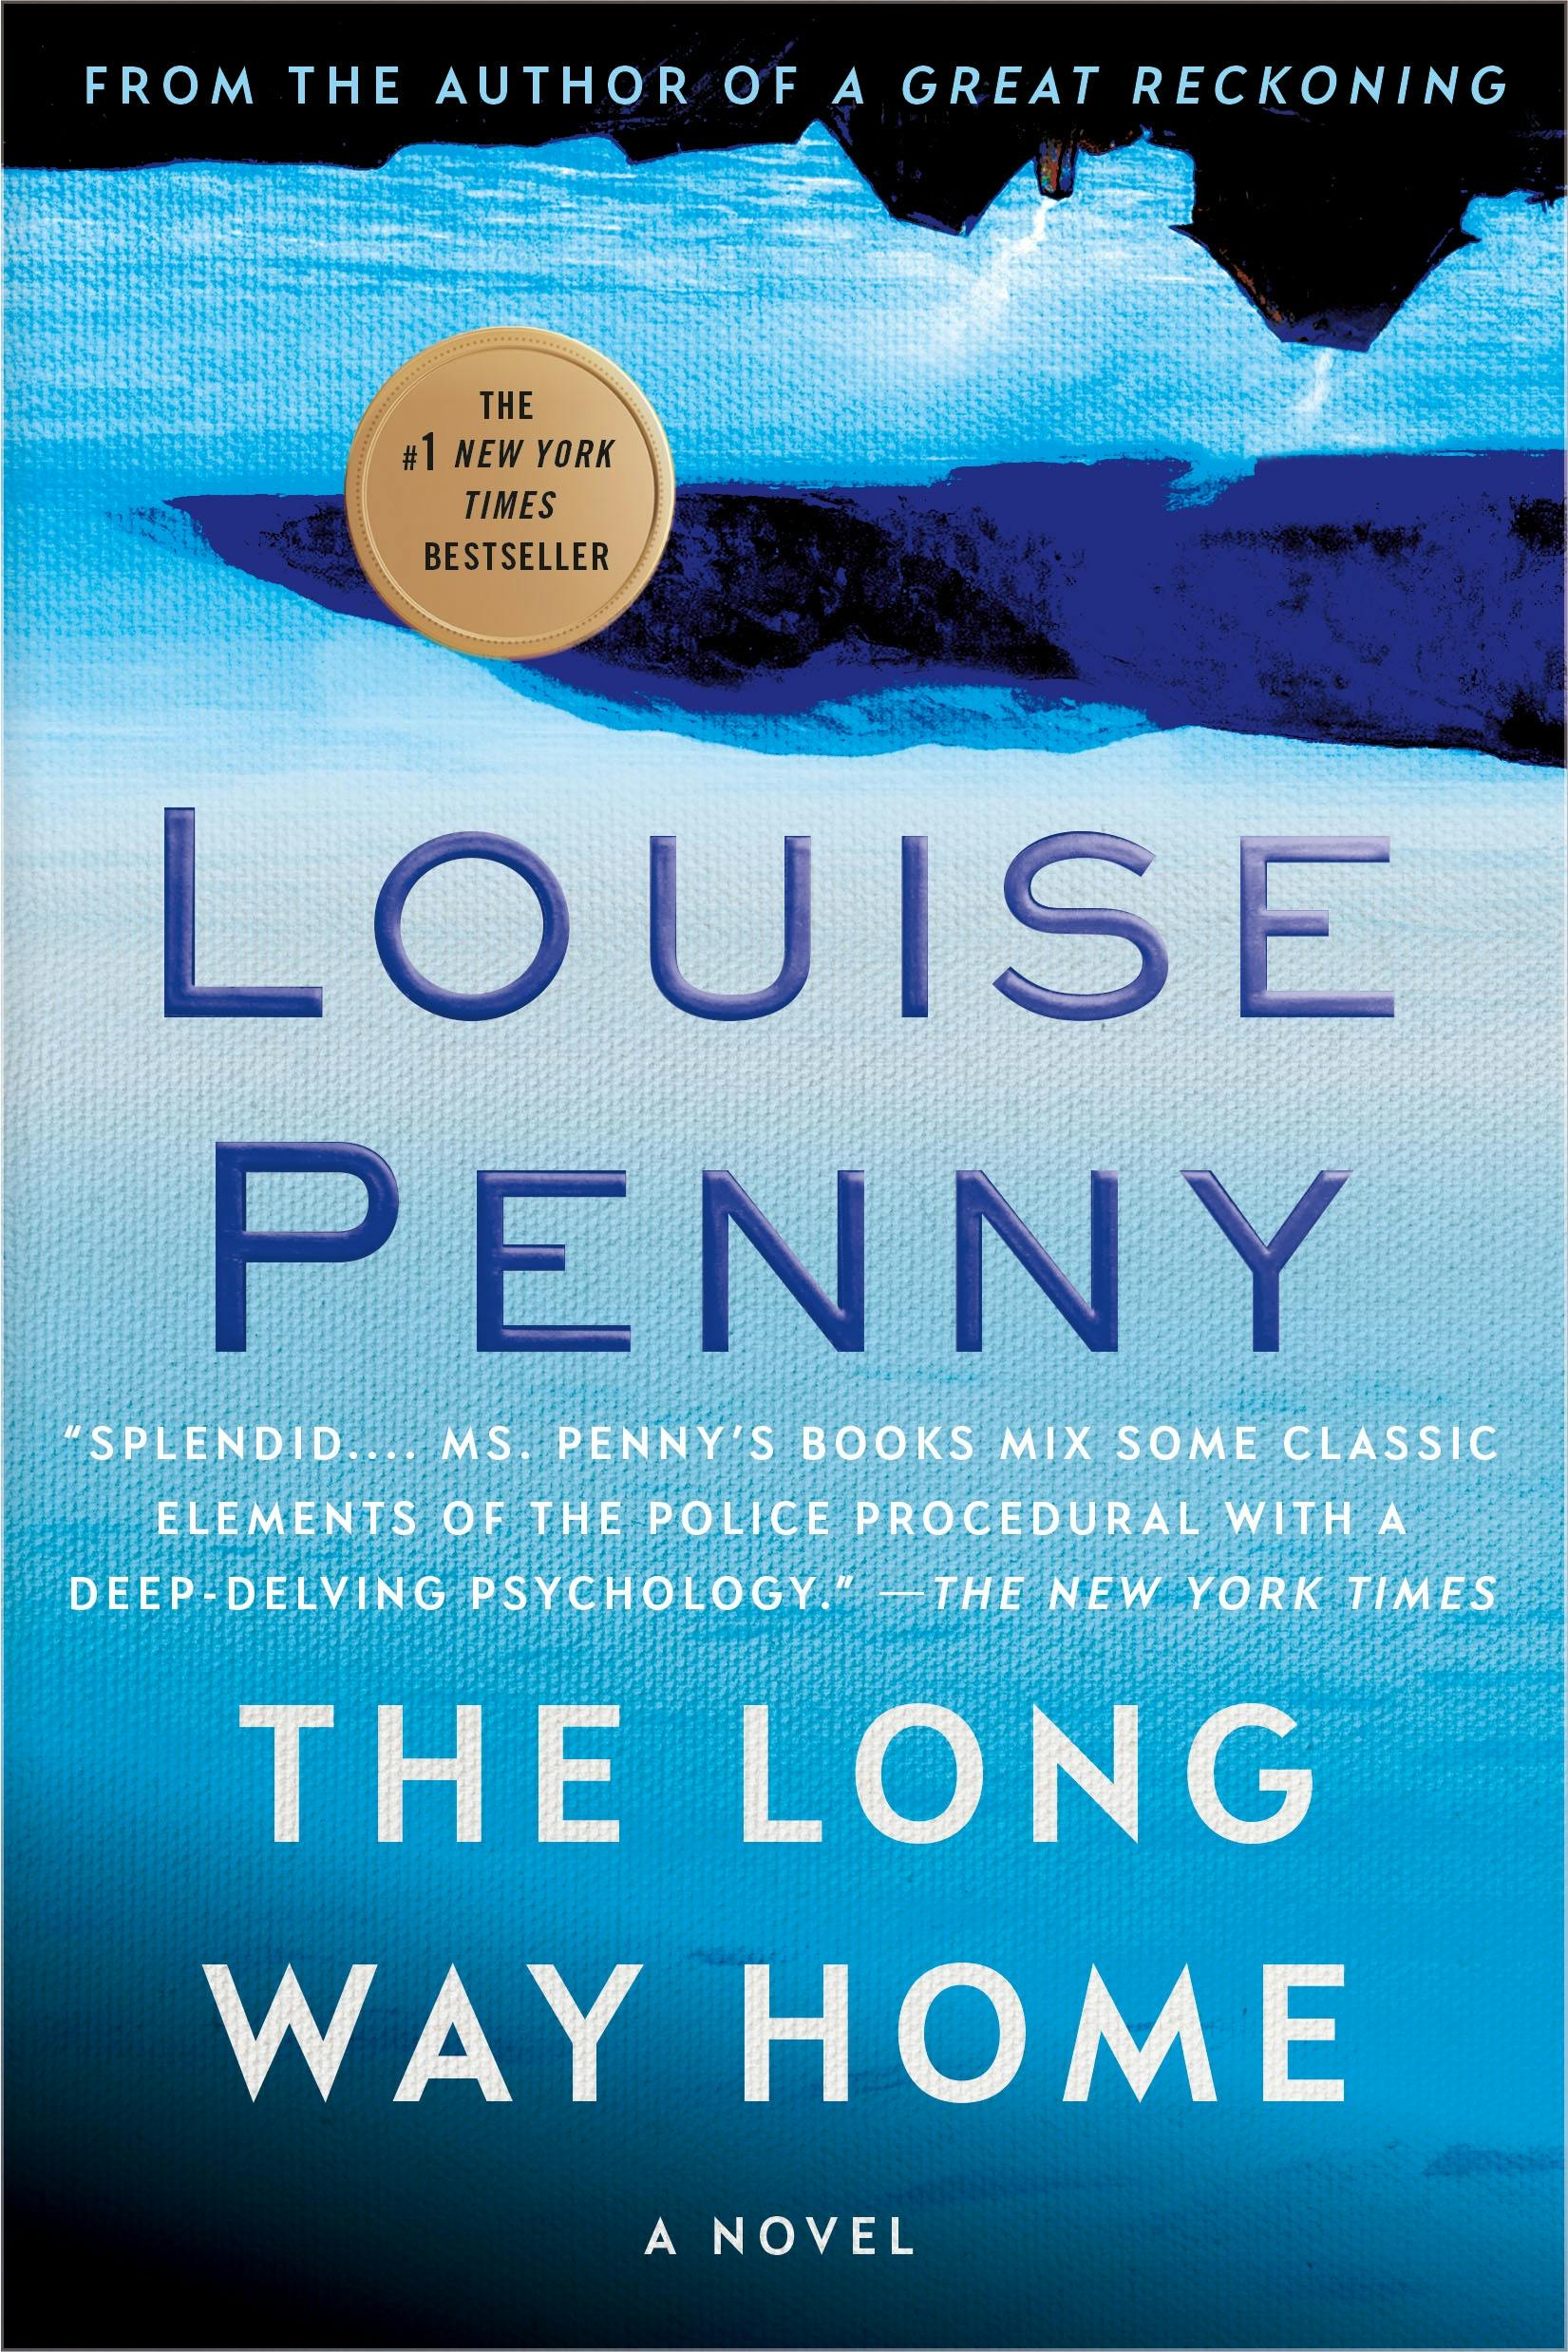 18 Louise Penny Books in Order: Complete Guide to Inspector